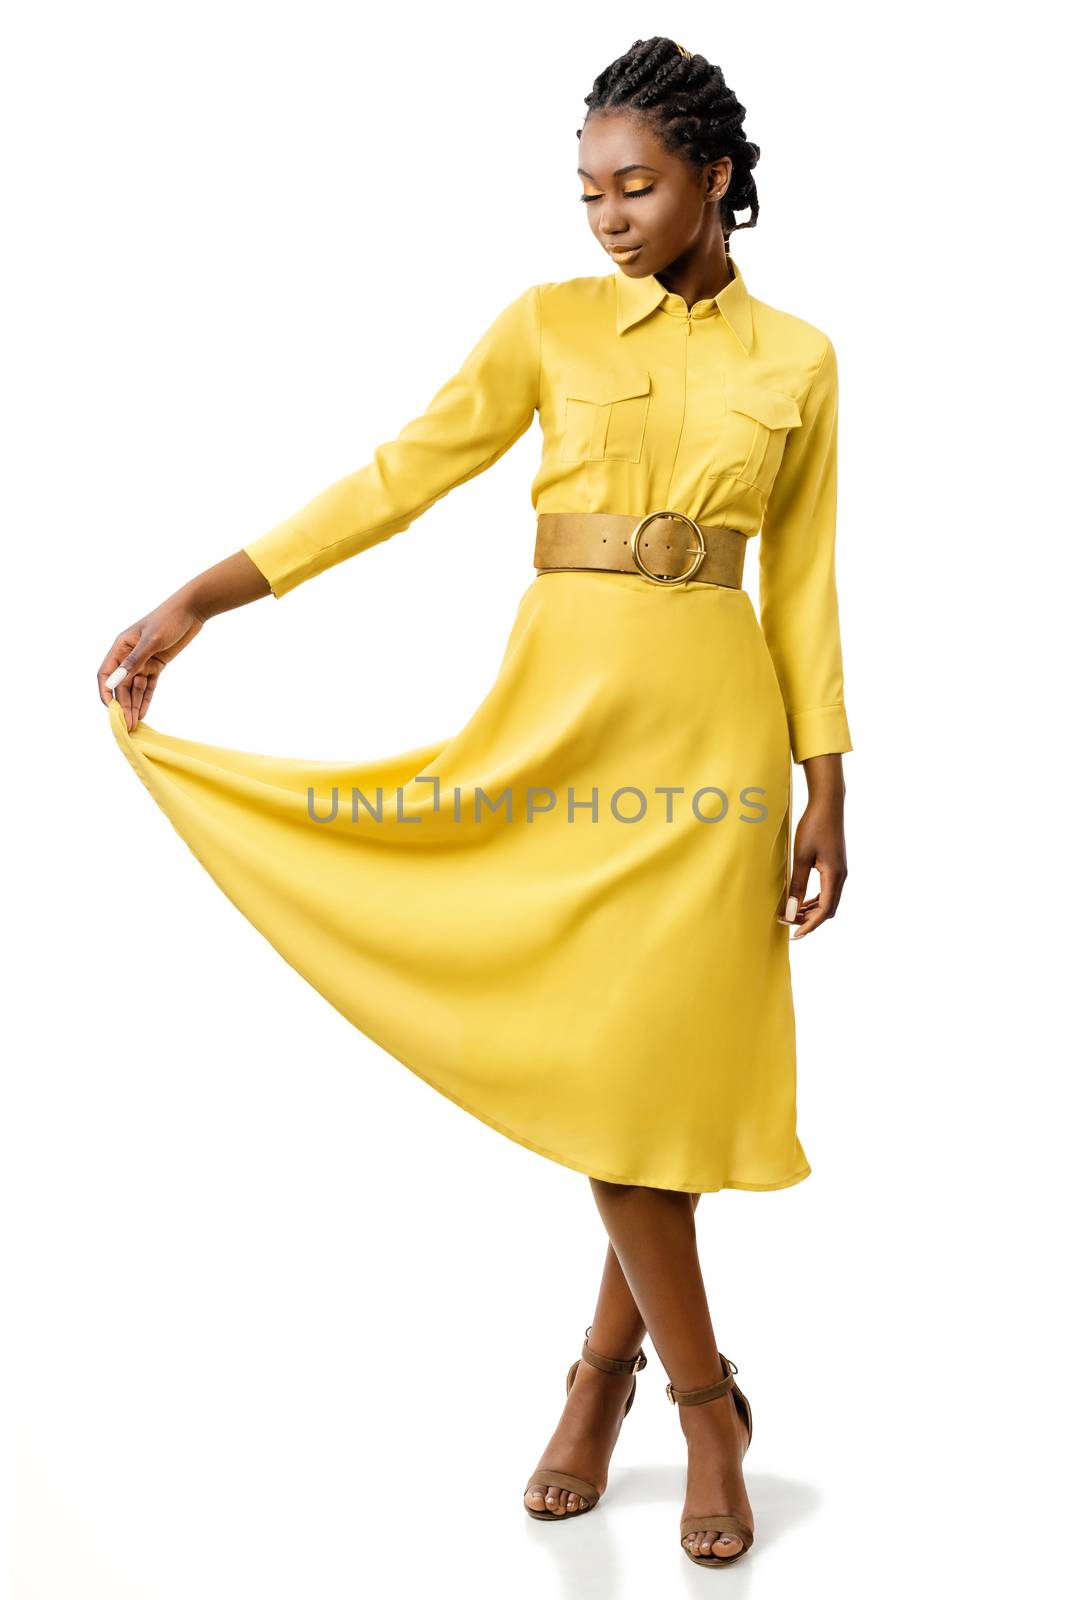 Attractive black girl in stylish yellow dress. by karelnoppe